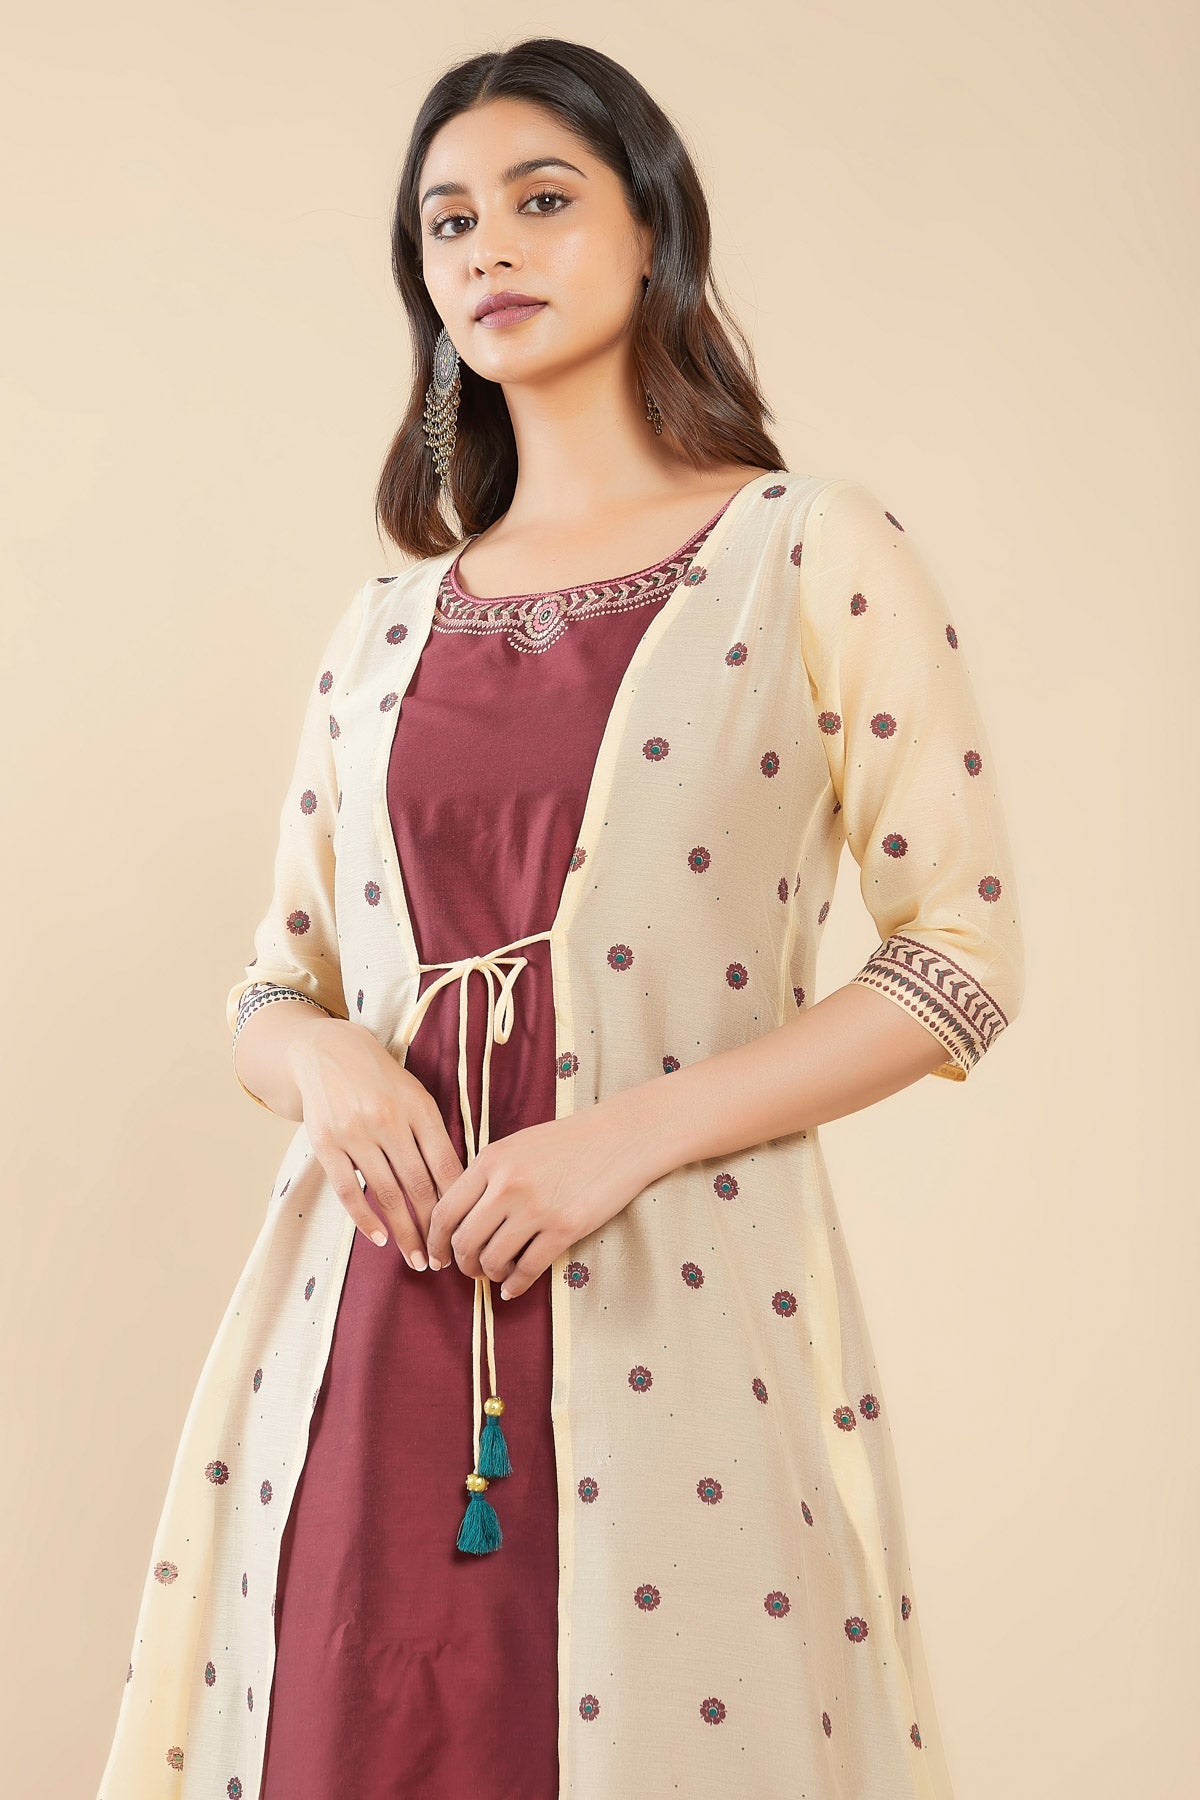 Floral Printed Attached Waist Coat With Geometric Printed Kurta Set - Maroon